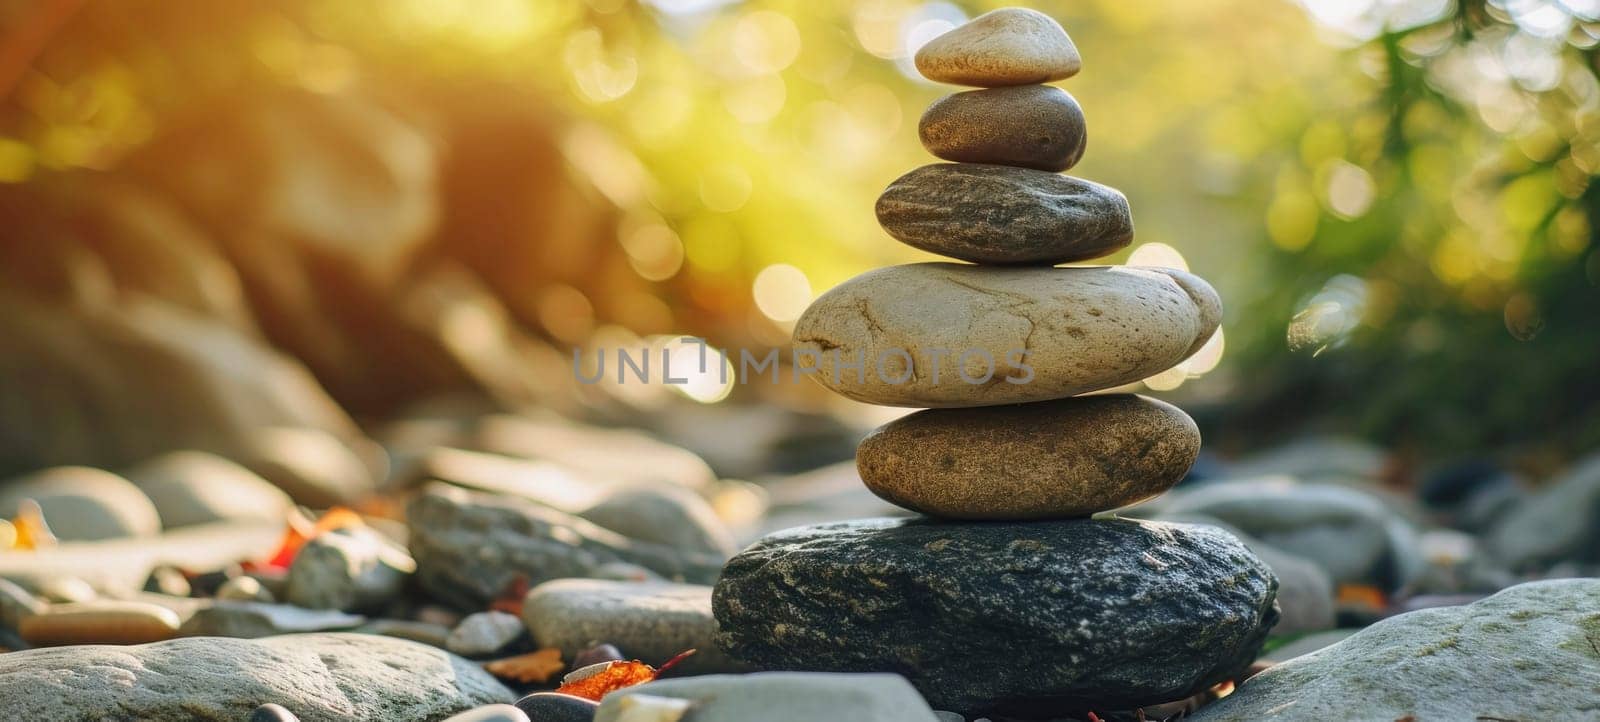 A stack of balanced stones on a mossy rock, creating a Zen-like natural scene with a warm sun flare in the background, symbolizing peace and mindfulness.